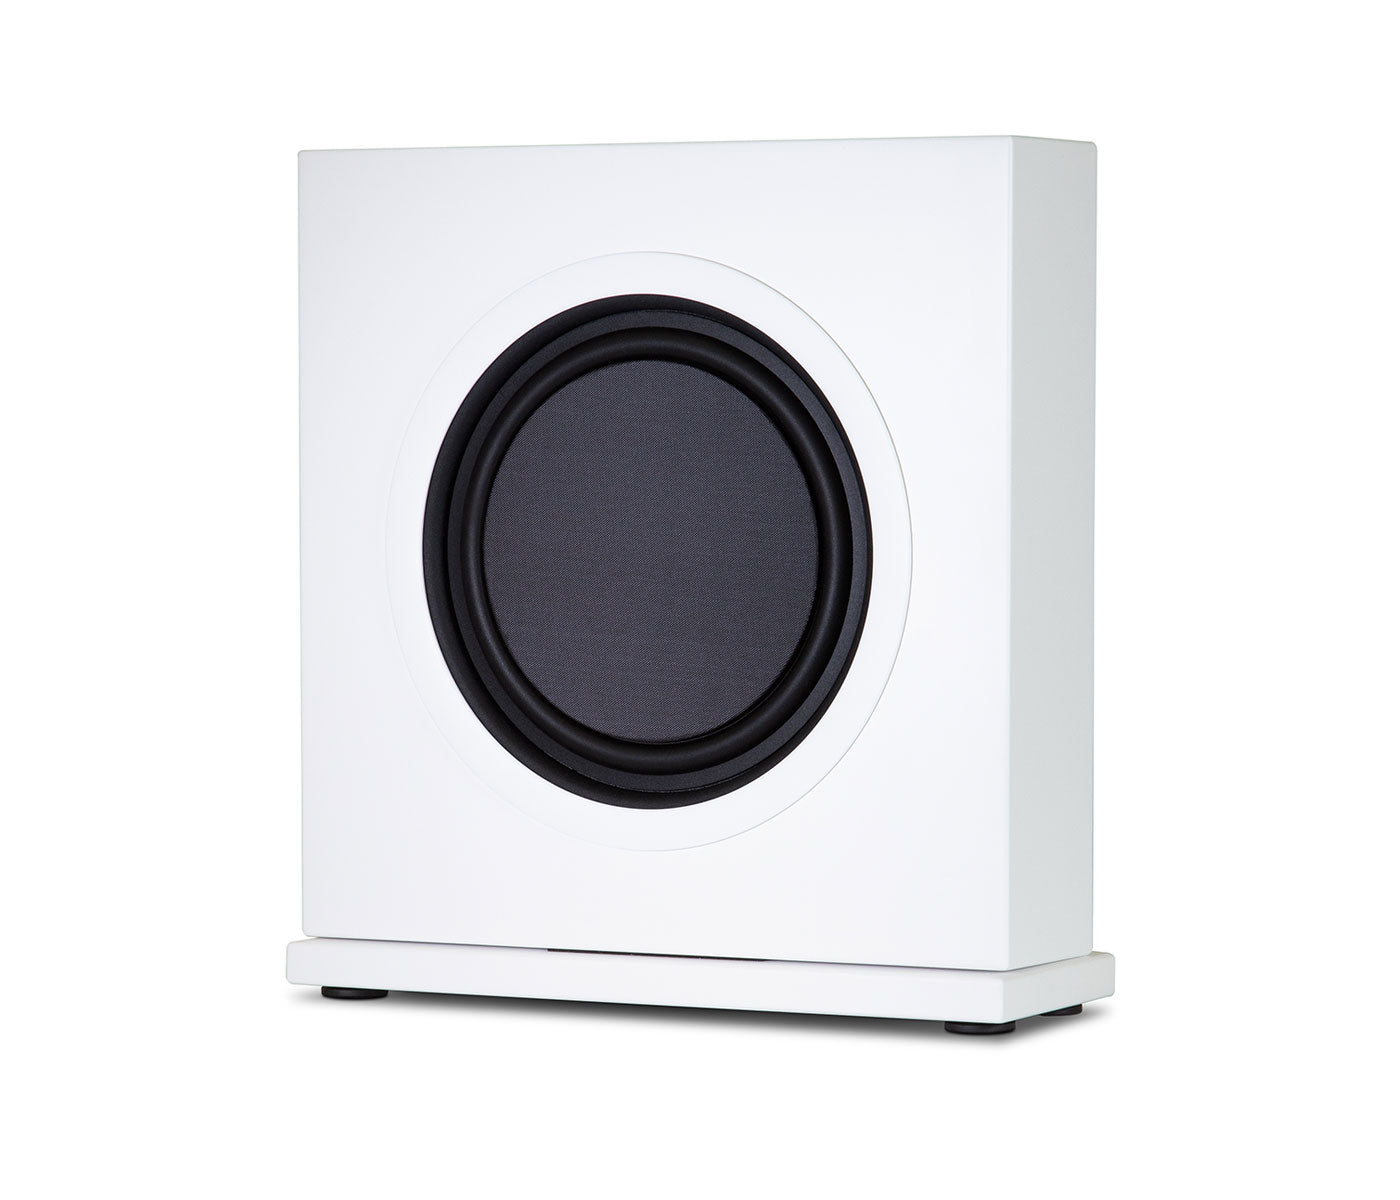 PSB CSIR SUB IN-ROOM SUBWOOFER - PSB Speakers is a Canada's leading manufacturer of top-performing and for high quality Audio Speakers, headphones, loudspeakers, subwoofers, Home Theater Systems, Floorstanding Speakers, Bookshelf Speakers, loudspeakers and more available here at Vinyl Sound.